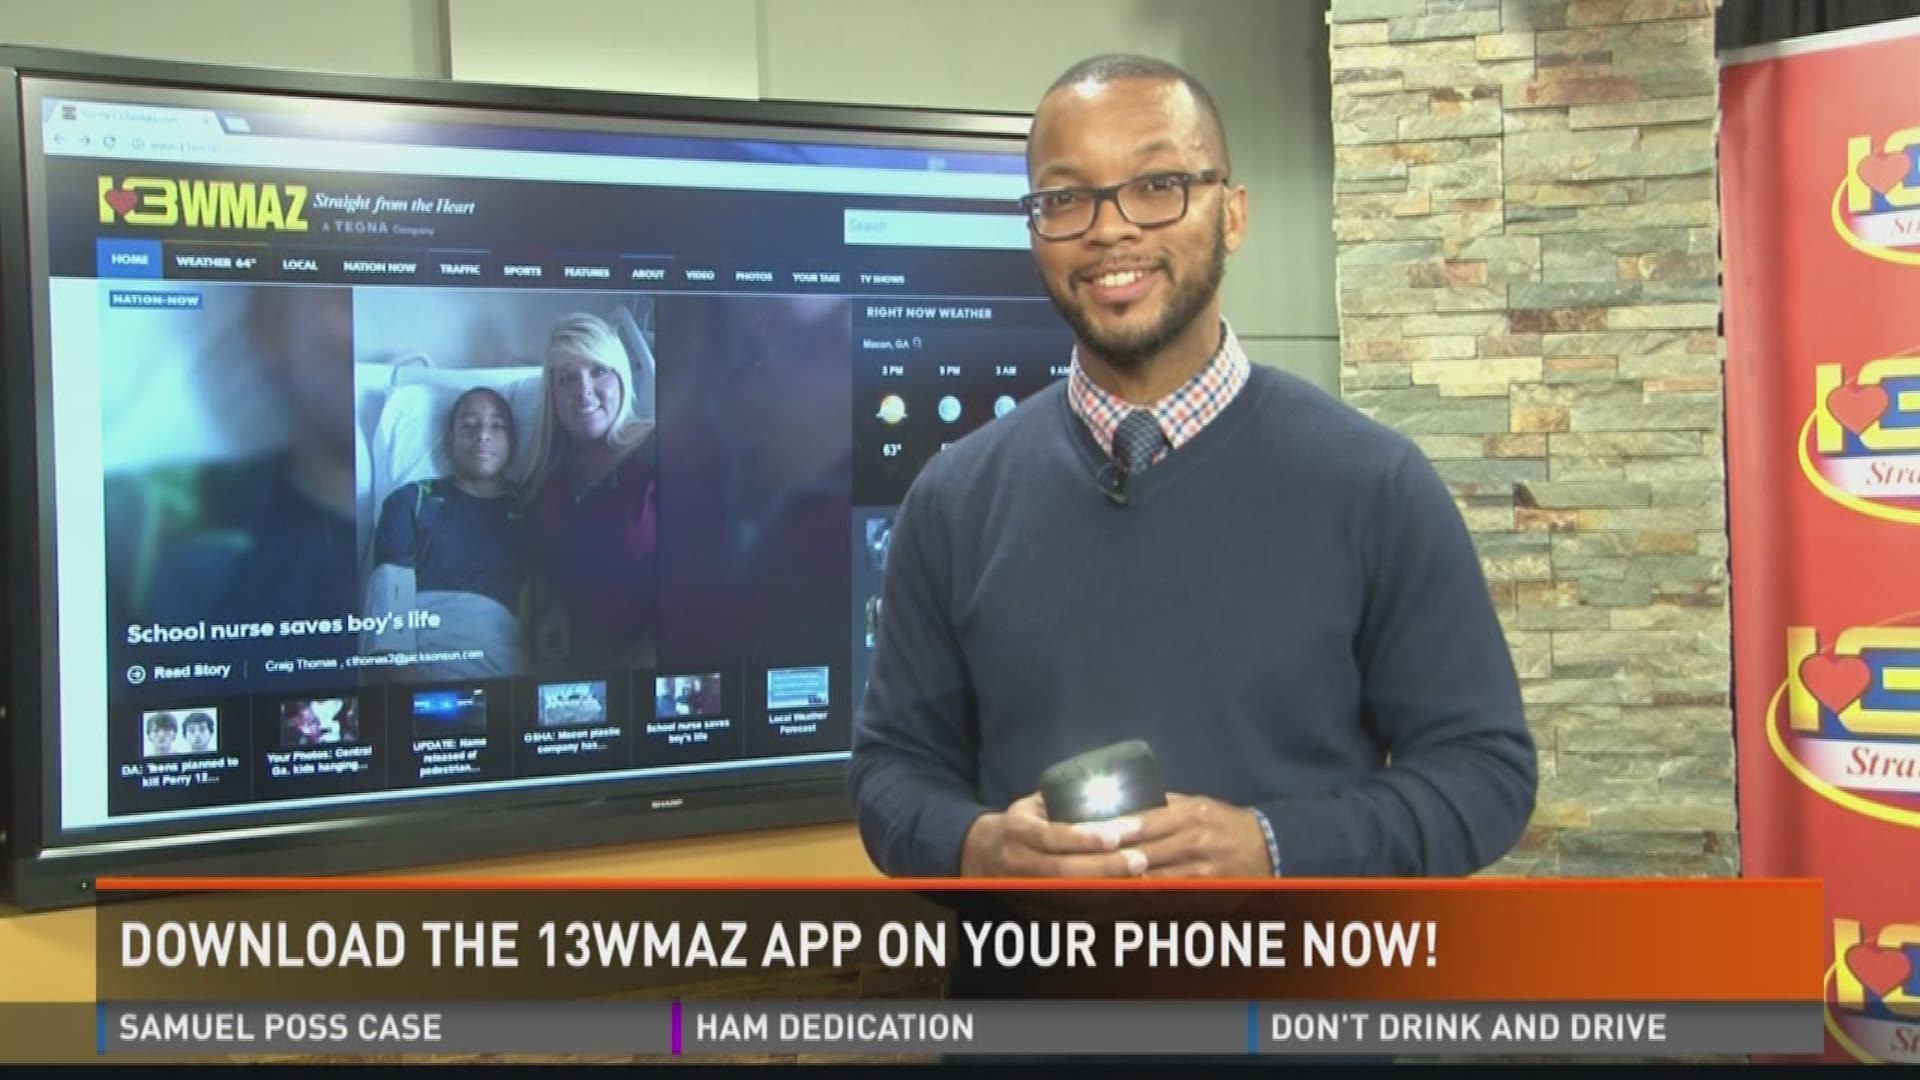 Download the 13WMAZ app on your iPhone or Android and sign up for text alerts to hear about severe weather or breaking news you need to know about.